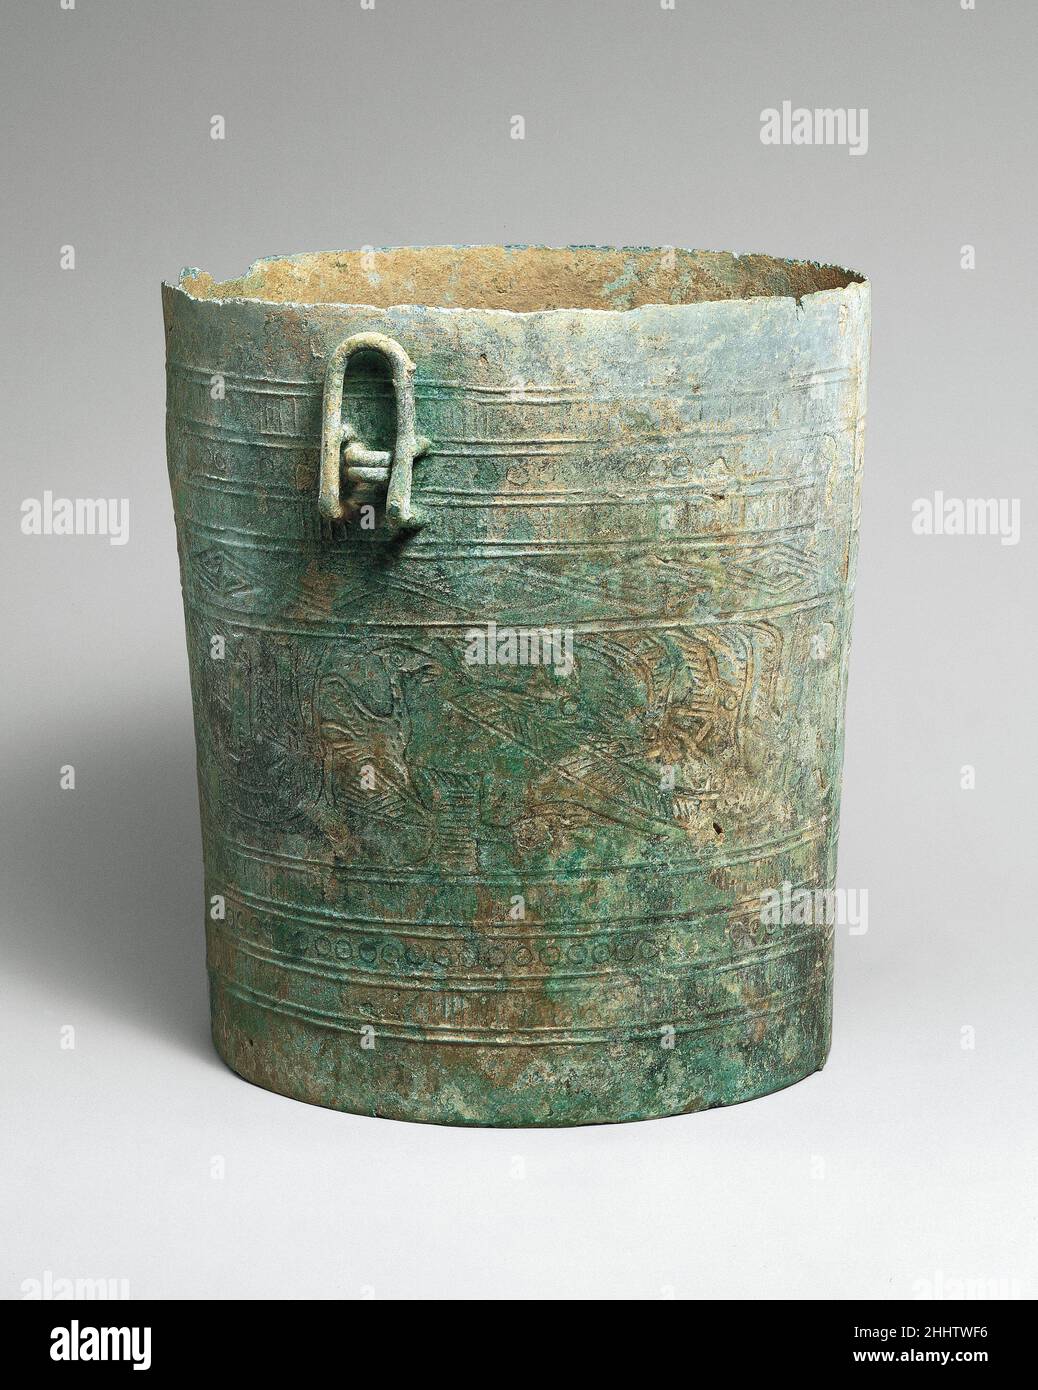 Situla with Design of Boats ca. 500 B.C.–A.D. 300 Vietnam Axes, situlae, and drums play an important role in Vietnam's Dongson culture named after a site located on the coastline to the south of present-day Hanoi that was first excavated in 1924. The four long boats with seated warriors in the central horizontal band of this bucket shaped vessel, common images in the art of the Dongson culture, are also depicted, albeit more summarily, on the sides on the bronze model of a drum in this case. There had been much speculation regarding the meaning of this theme, which is interpreted as representa Stock Photo